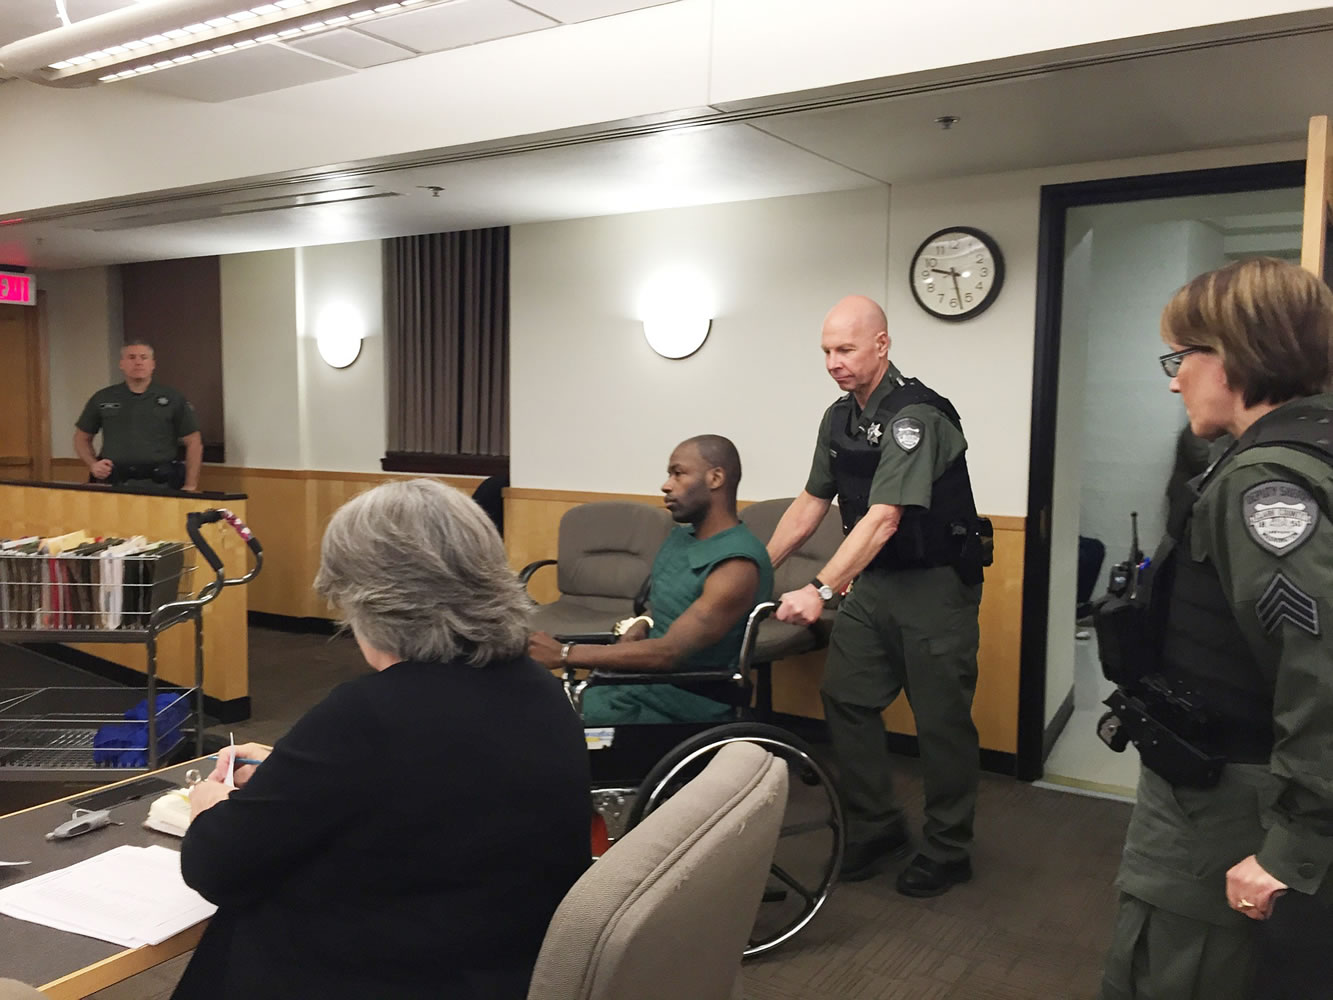 Paris Achen/The Columbian
A corrections officer pushes Gregory Wright, in wheelchair, into Clark County Superior Court. Wright appeared Thursday on suspicion of first-degree kidnapping and second-degree assault of a mental health counselor.